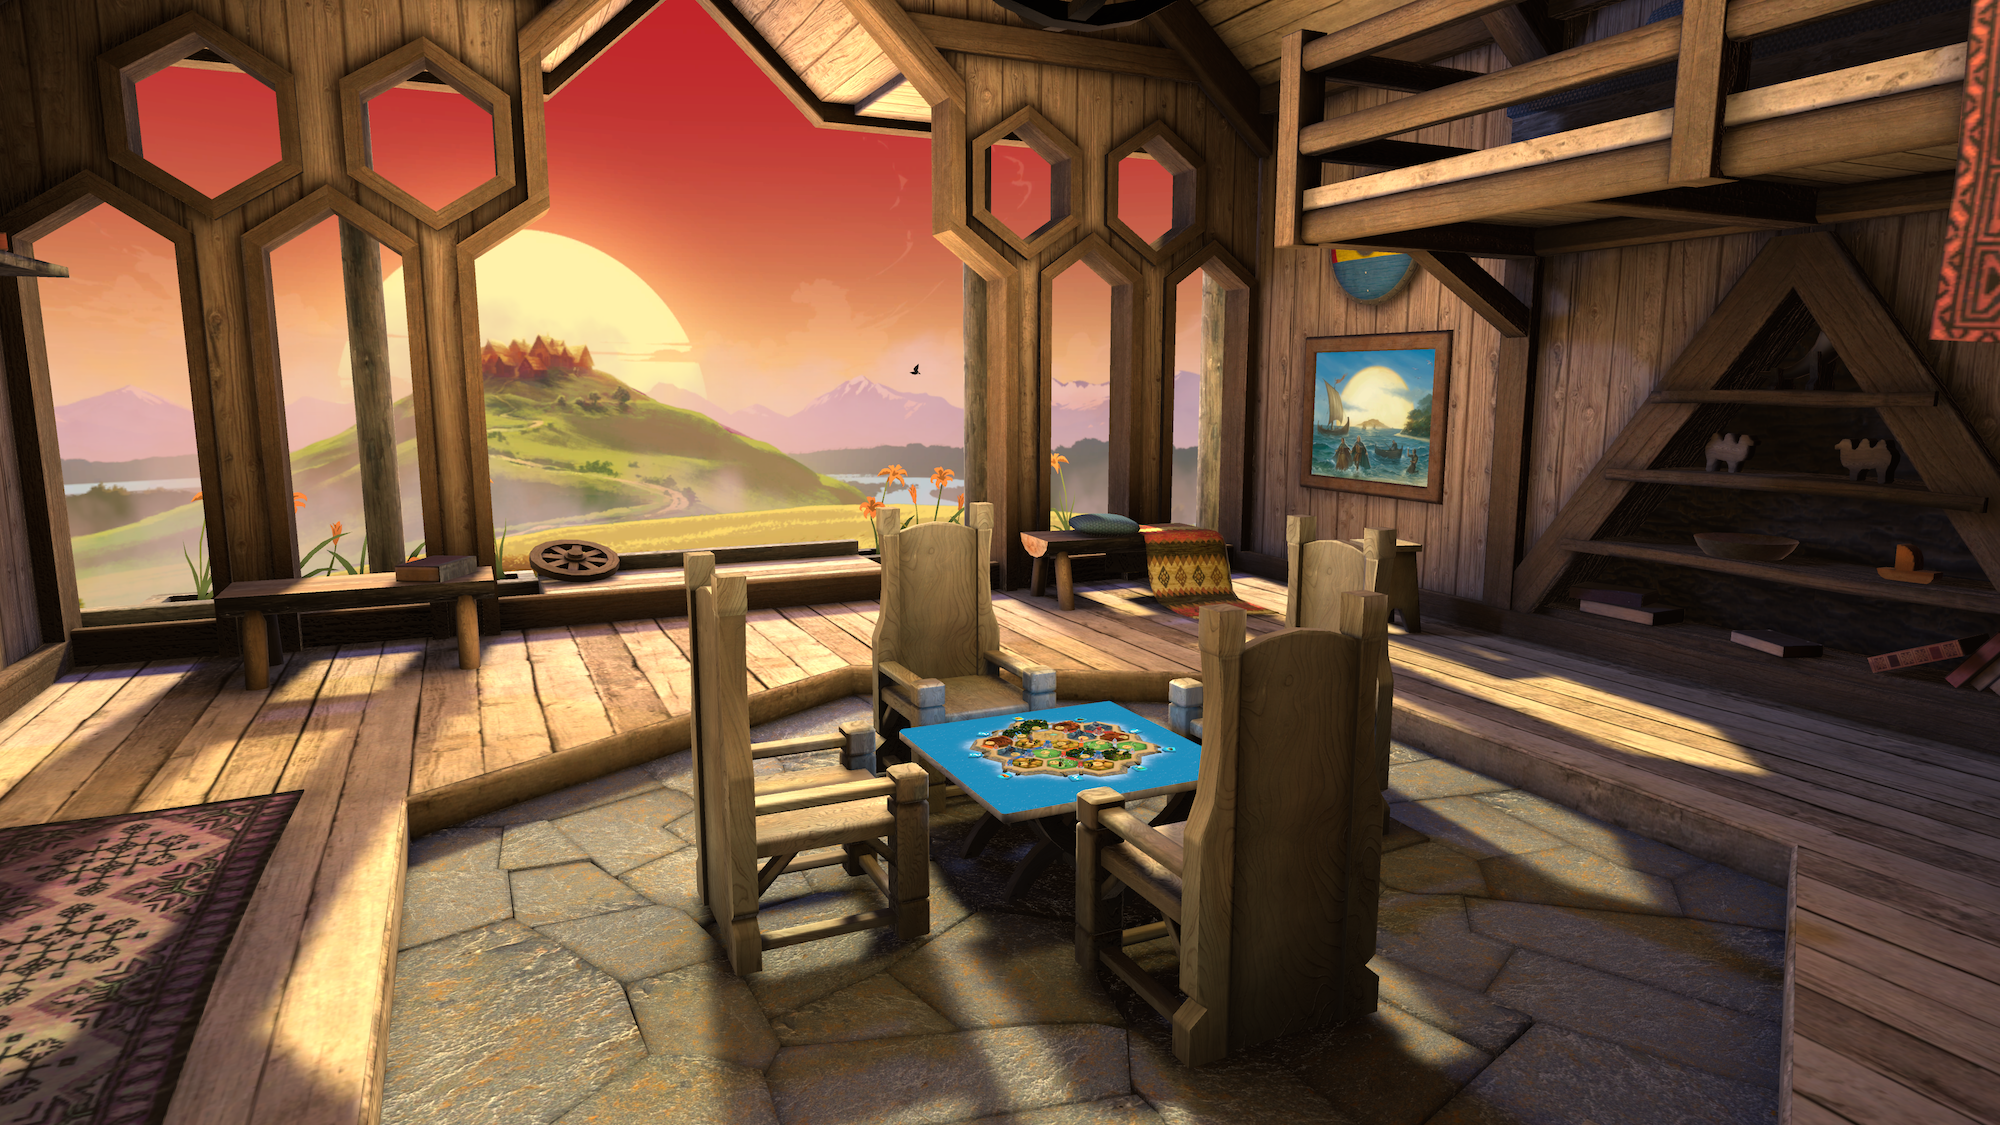 Catan VR gets closer to the real thing than any app | DeviceDaily.com